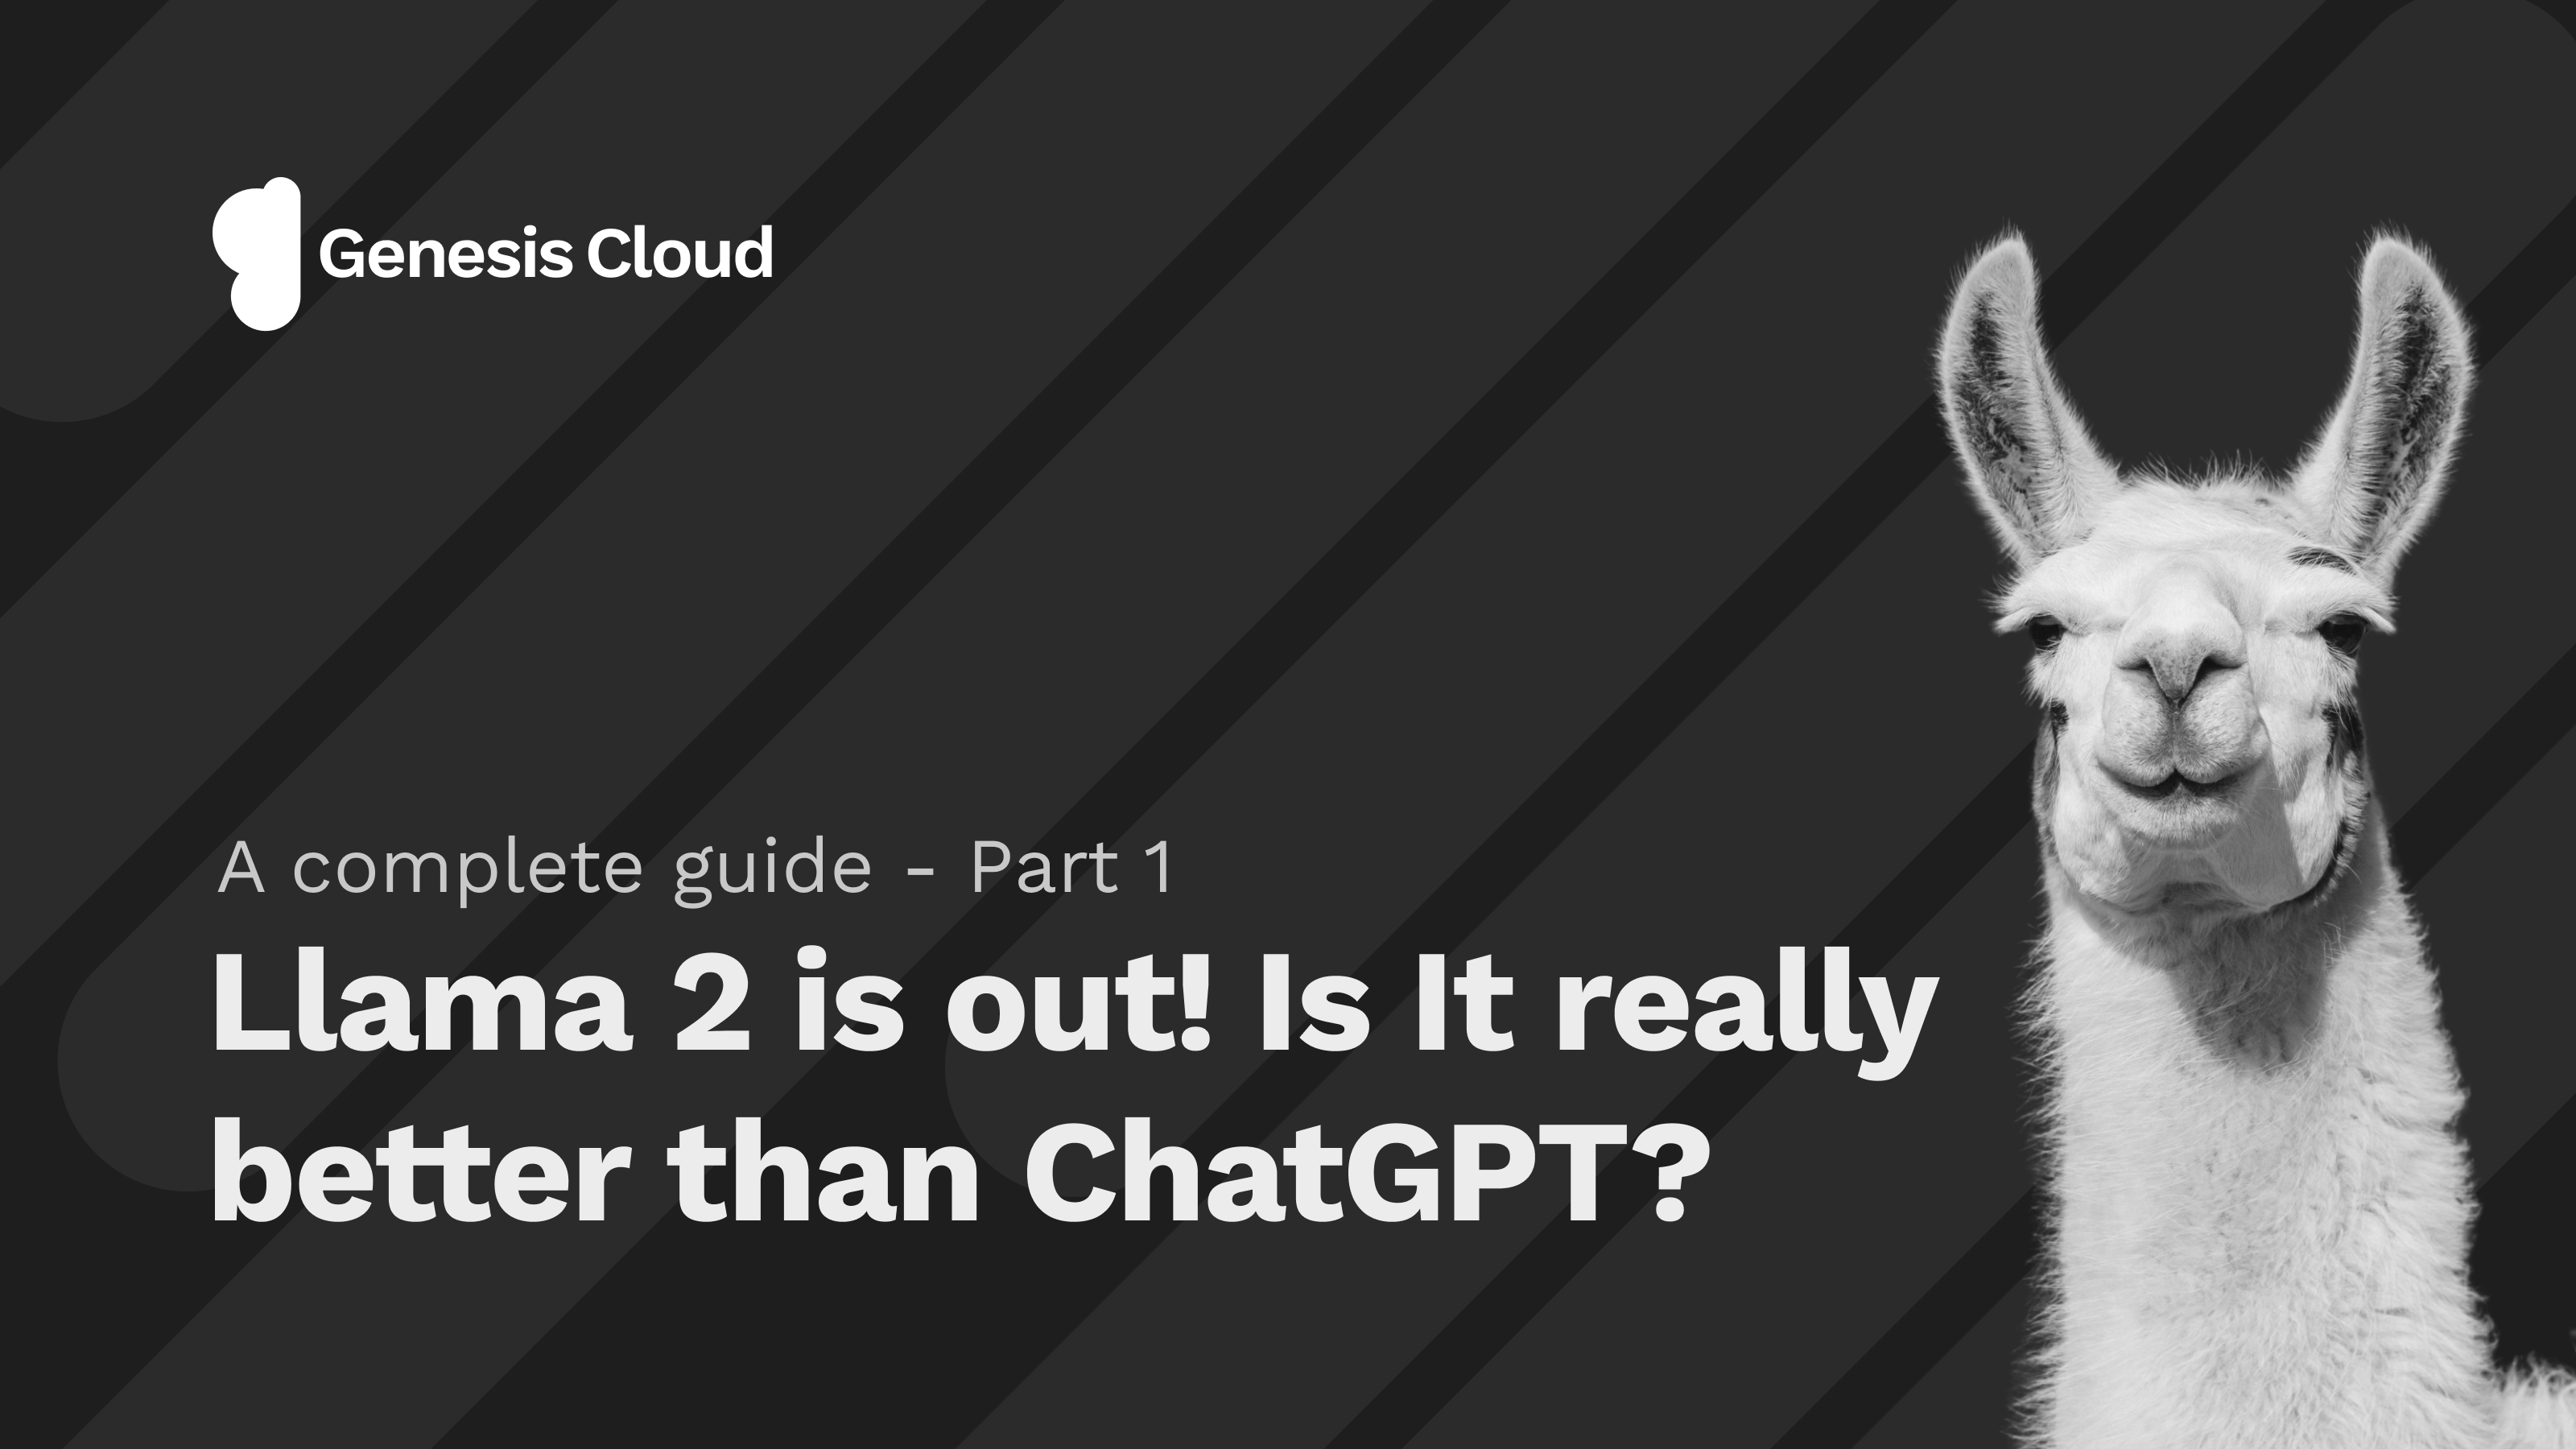 Llama 2 is out! Is it really better than ChatGPT? Here is what you need to know.